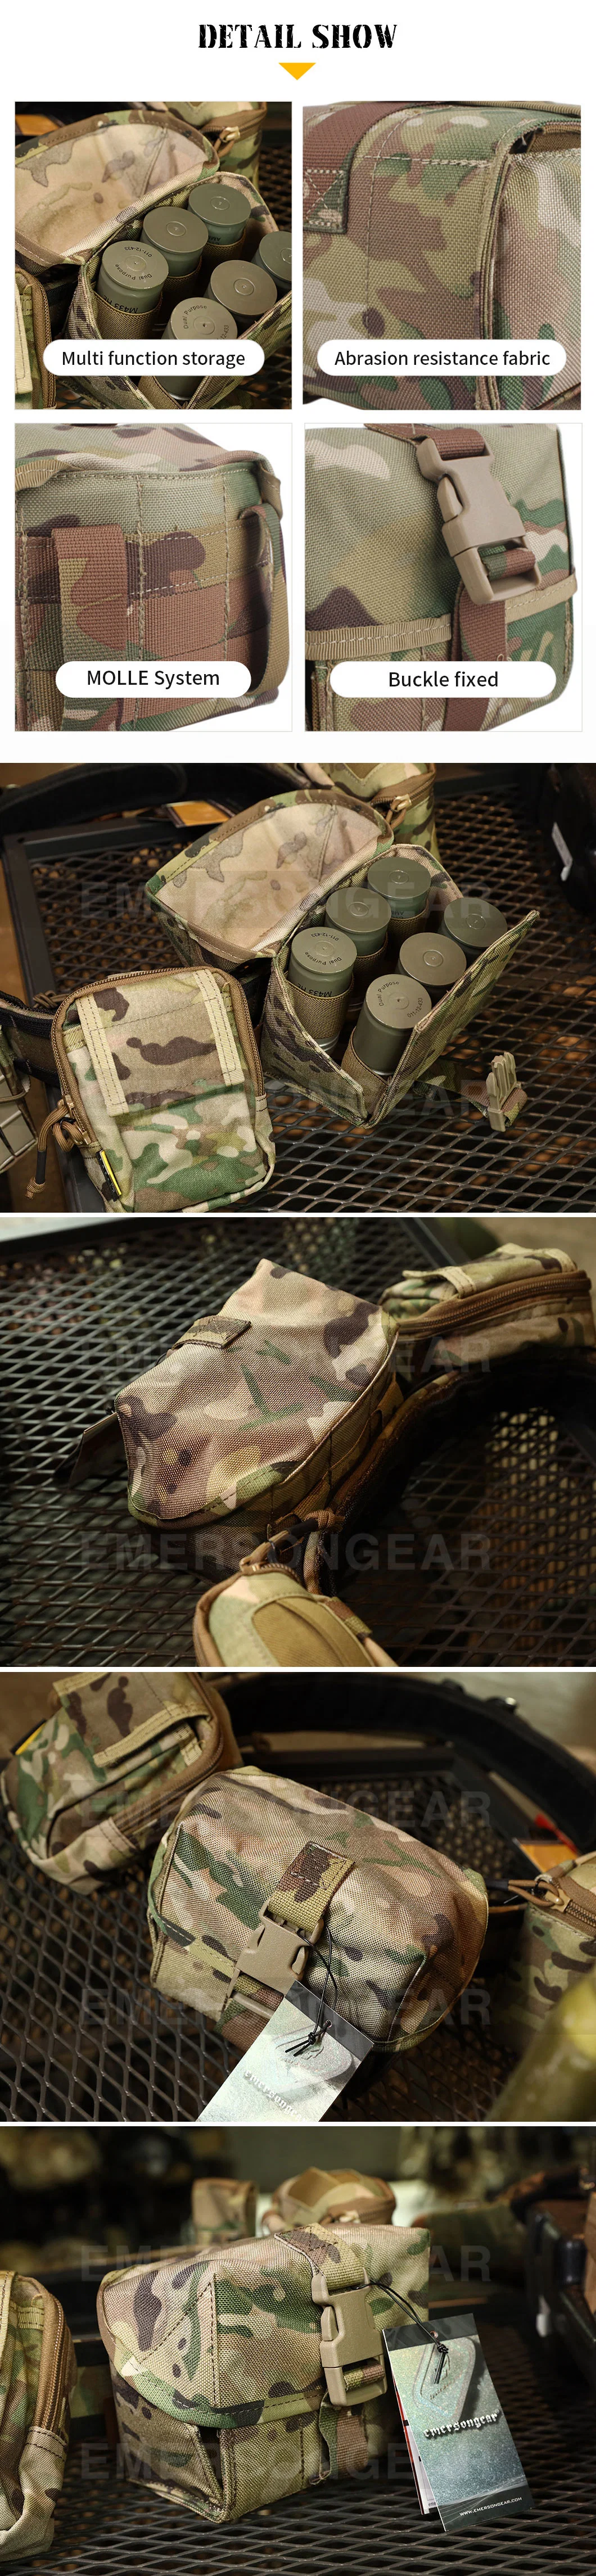 Emersongear 1000d Nylon 40mm Ammo Pouch Mag Pouches Tactical Gear Grenade Pouch